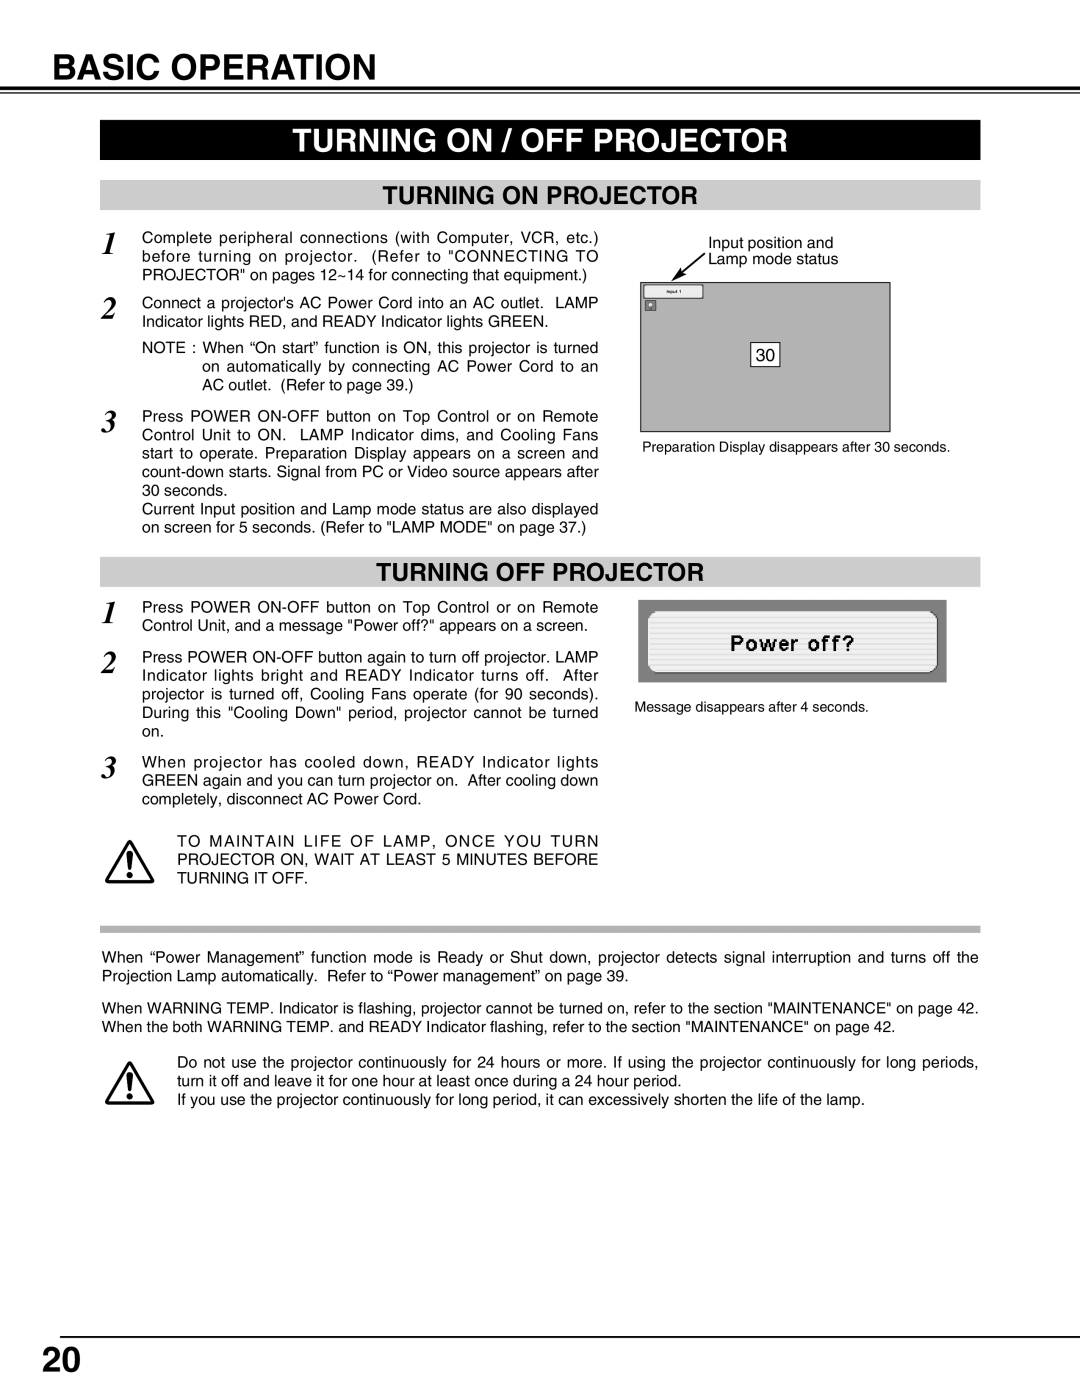 Eiki LC-X70 instruction manual Basic Operation, Turning On / Off Projector, Turning On Projector, Turning Off Projector 